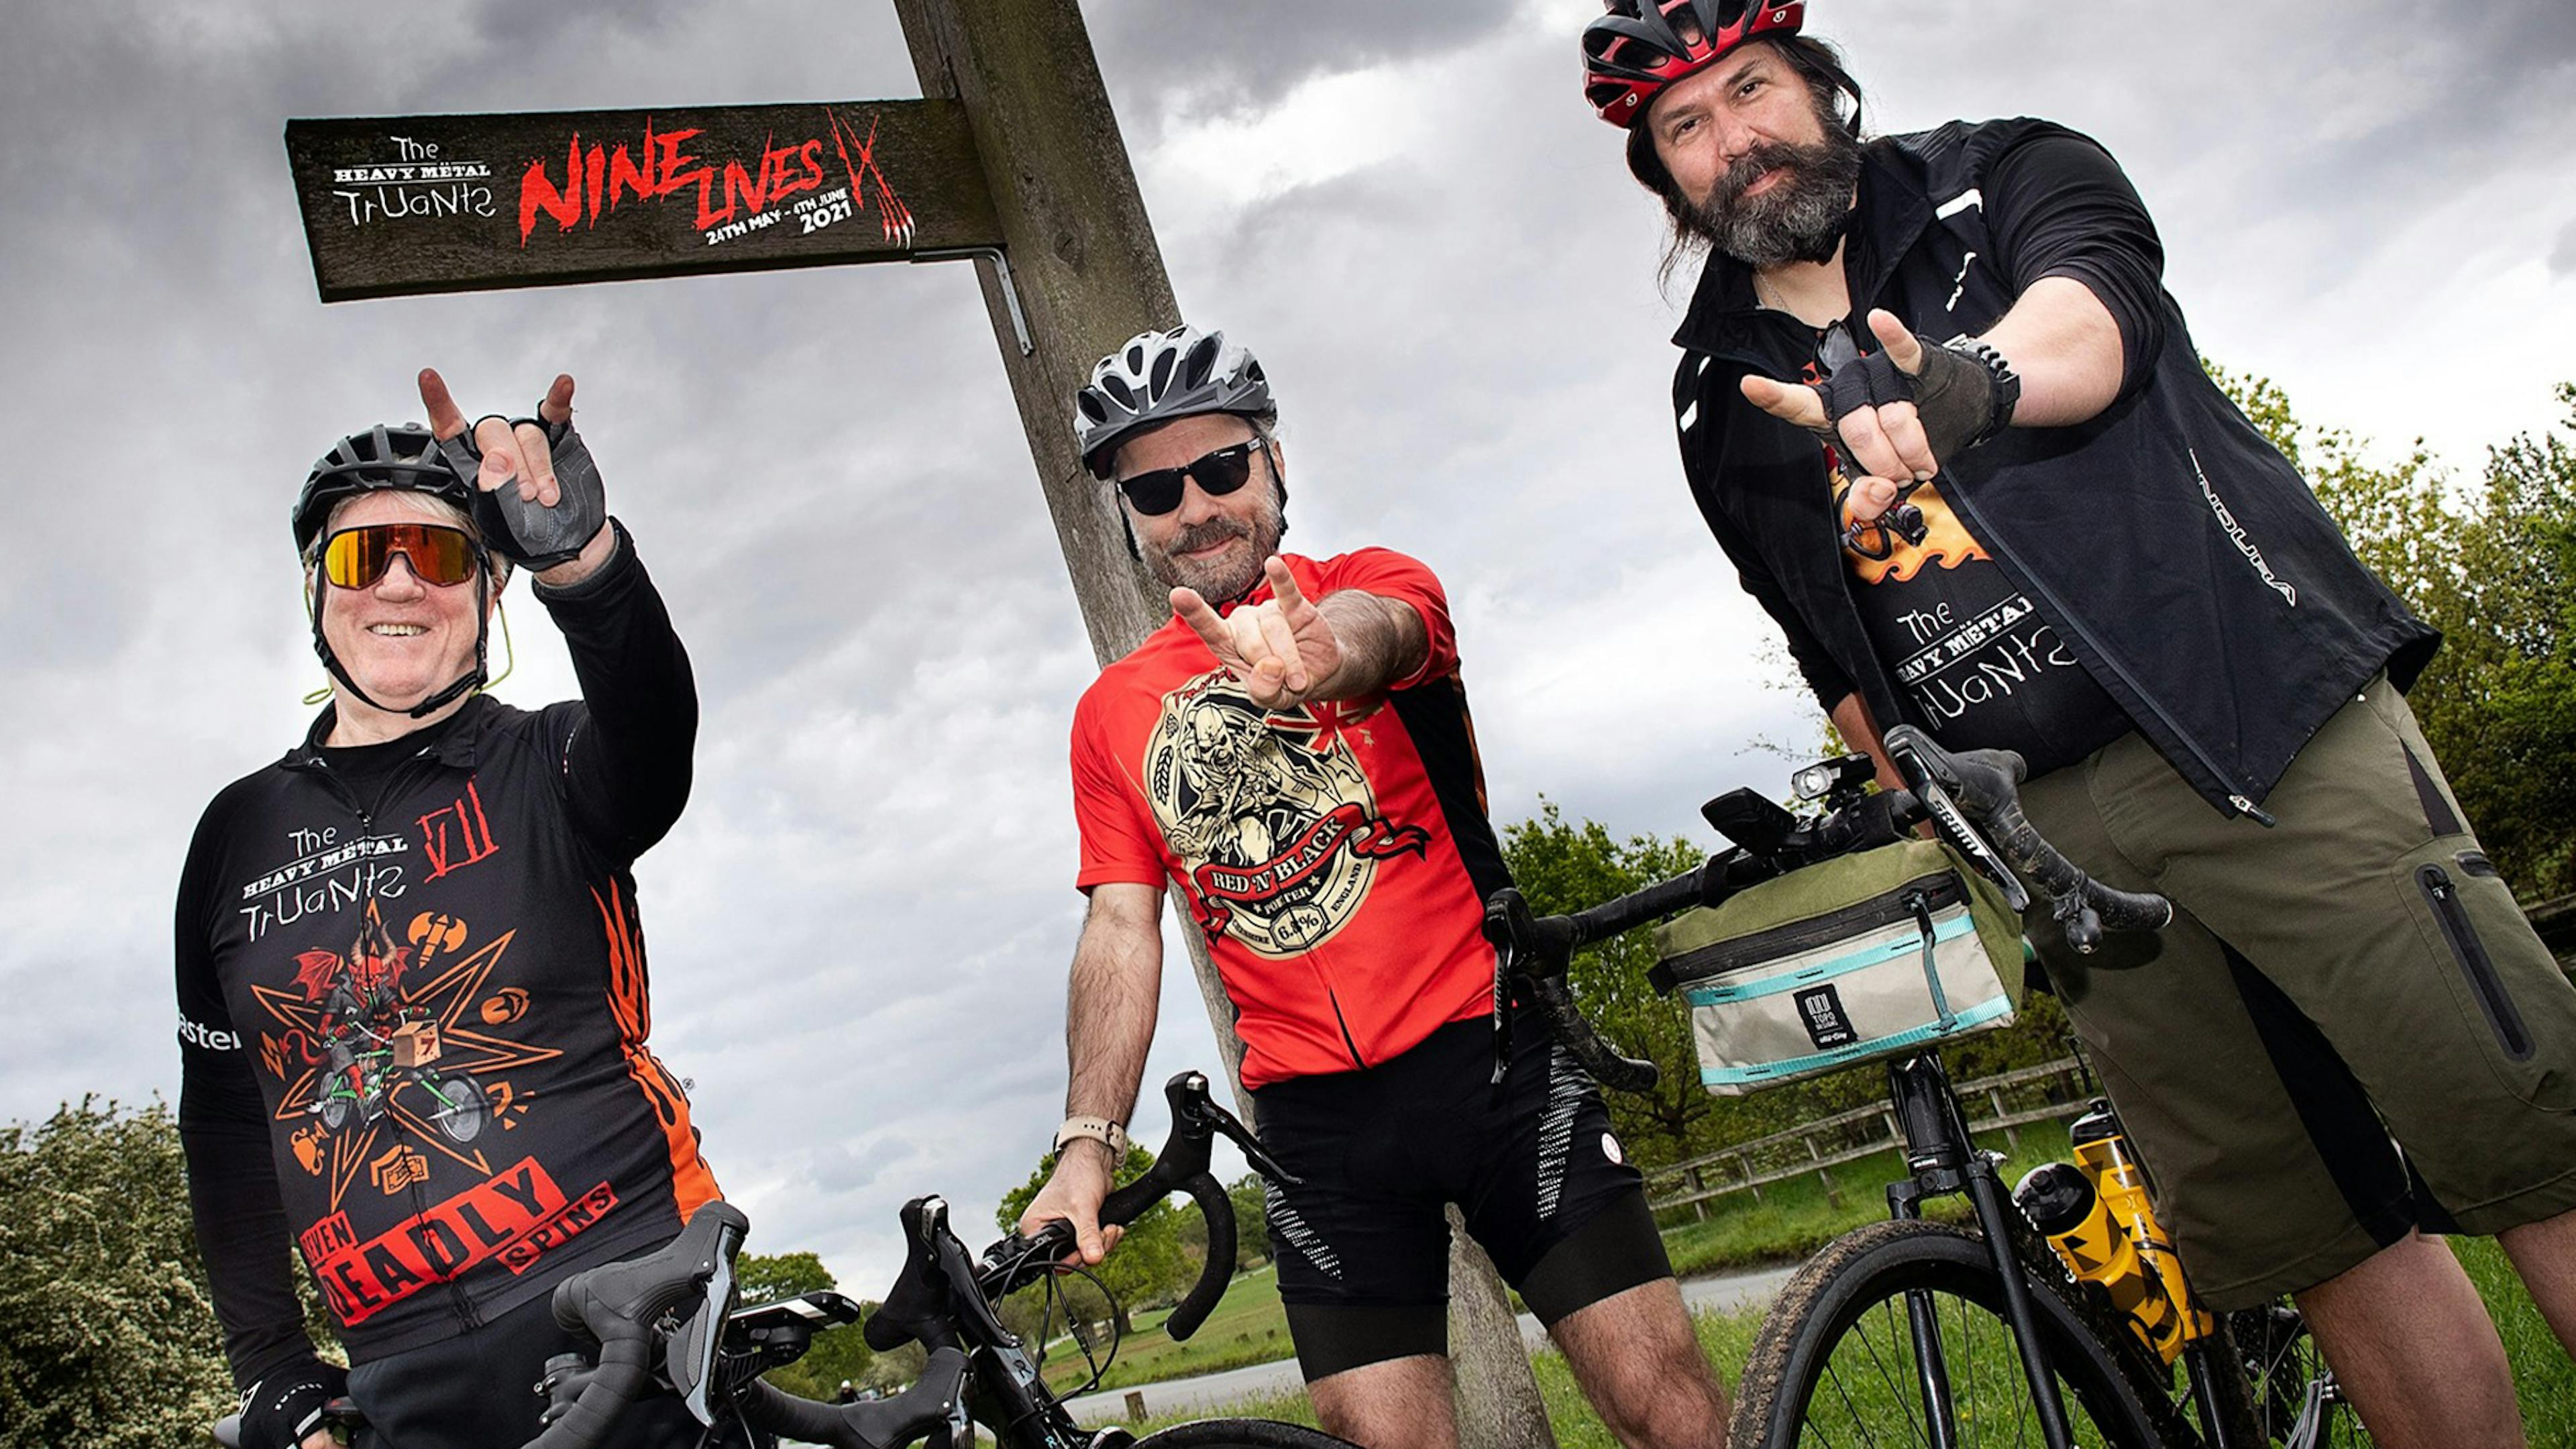 Heavy Metal Truants: Meet the wholesome metalhead bicycle gang raising money for charity